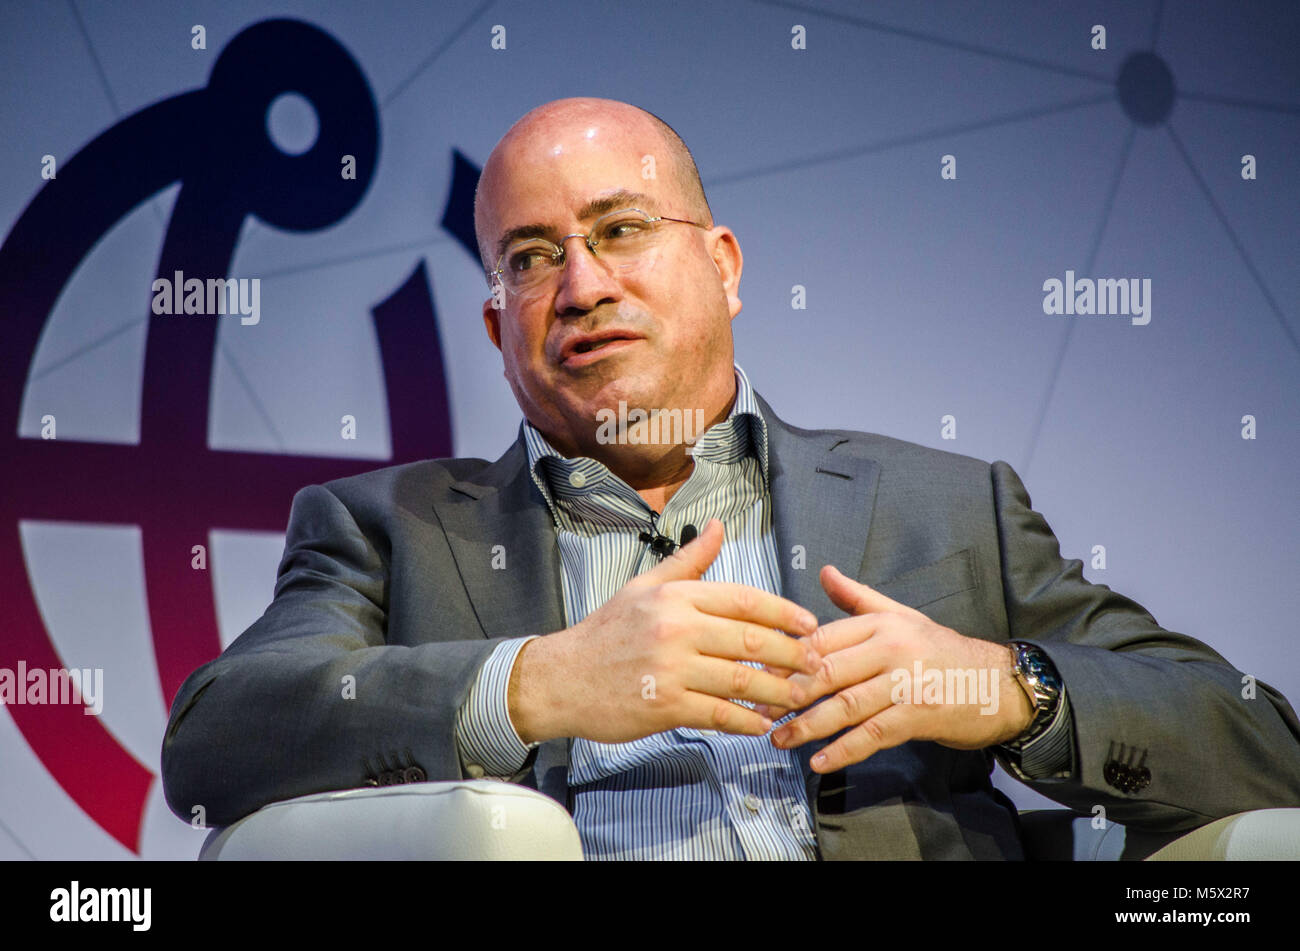 Barcelona, Catalonia, Spain. 26th Feb, 2018. Jeff Zucker, CNN Worldwide President, on stage during his speech at the Key note NÂº 3 of Barcelona Mobile World Congress. Credit: P Freire 26022018- CBB4302.jpg/SOPA Images/ZUMA Wire/Alamy Live News Stock Photo